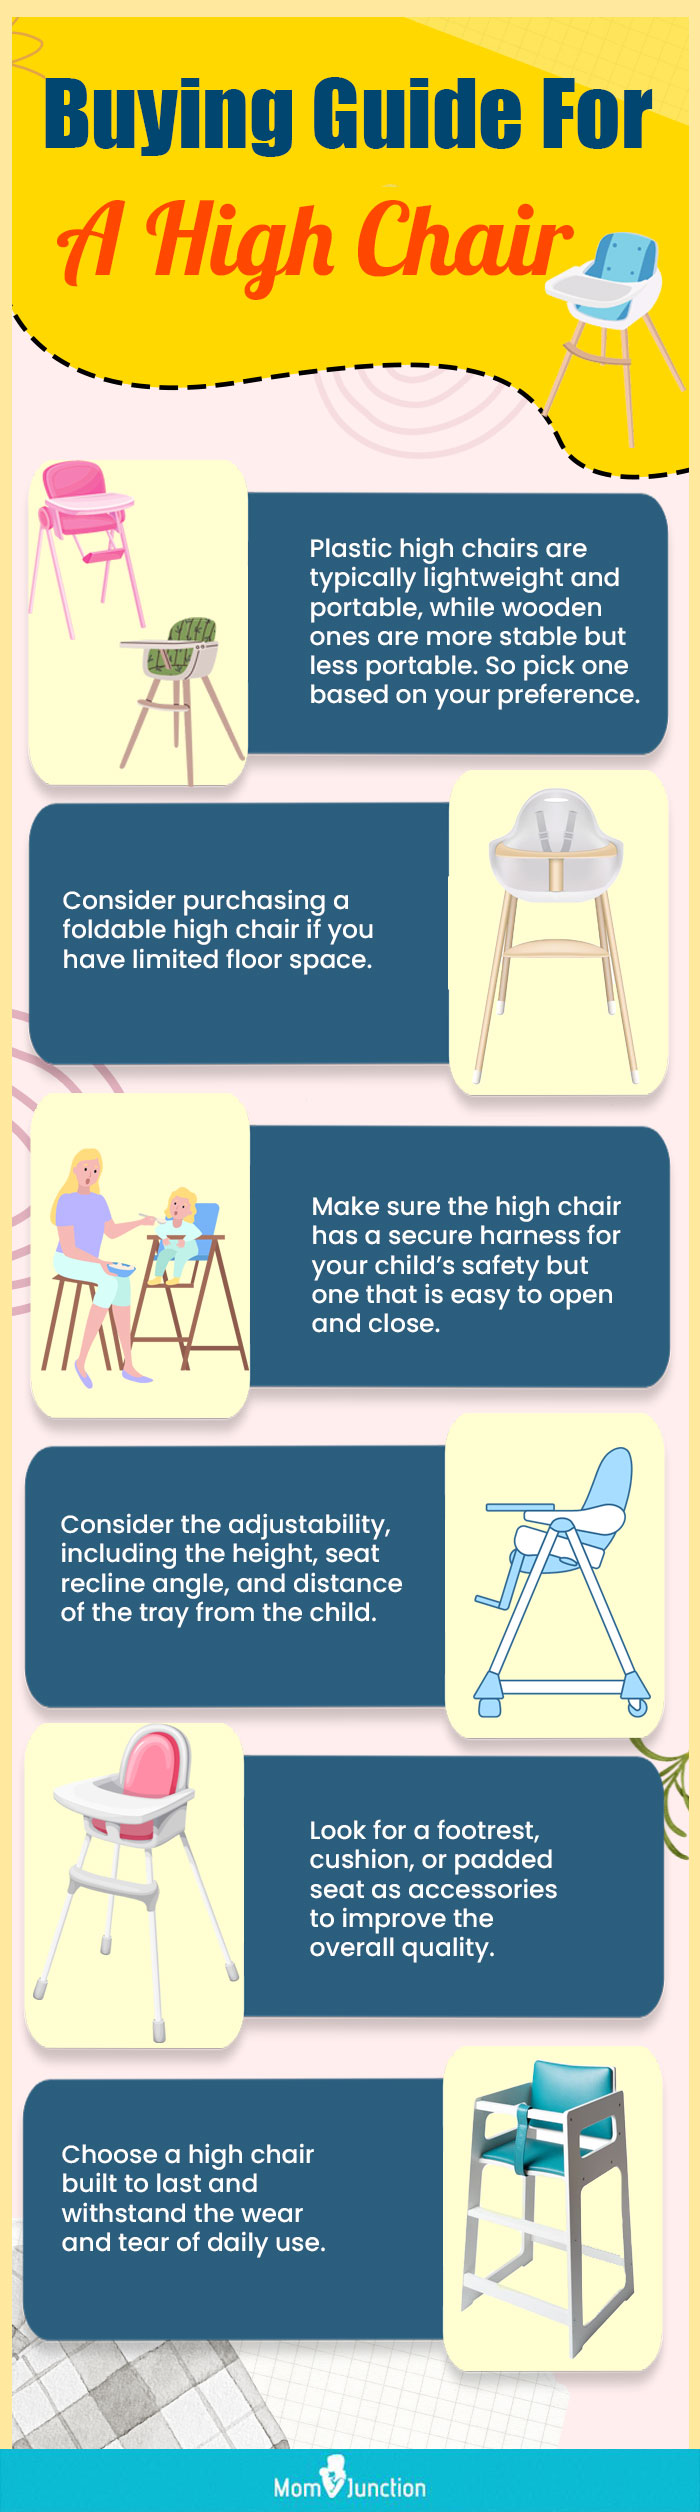 Buying-Guide-For-A-High-Chair (infographic)